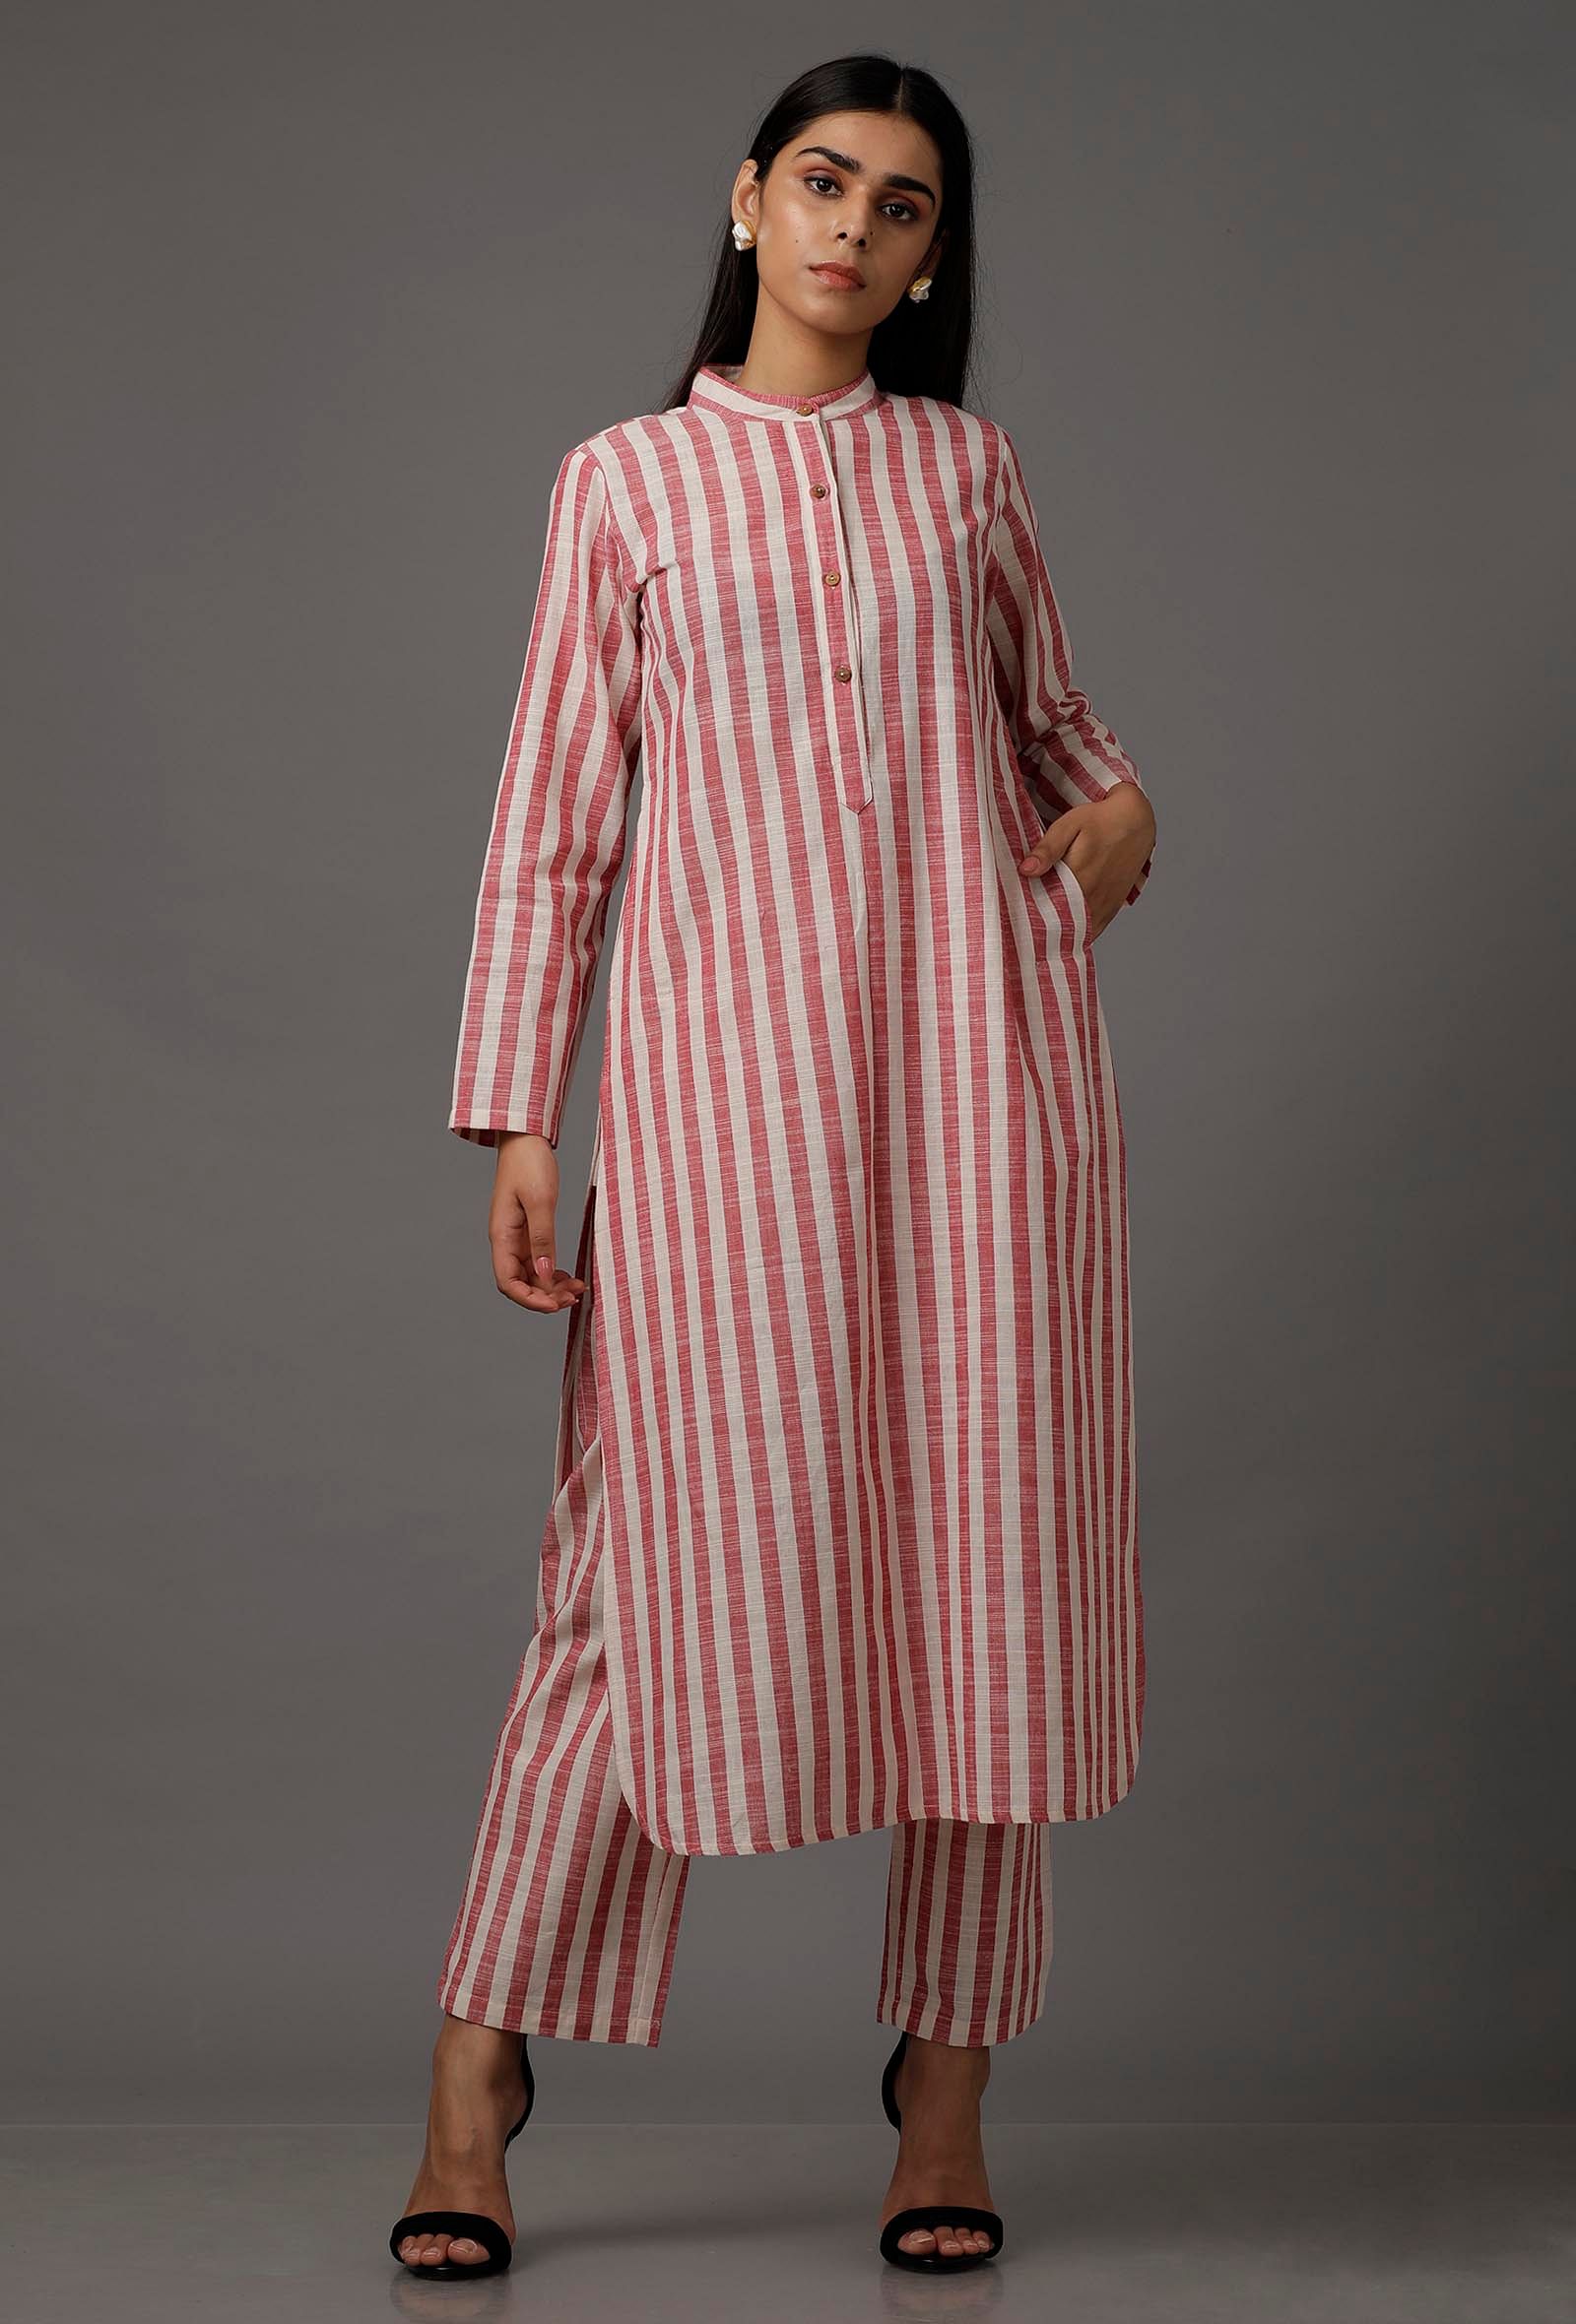 Set of 2: Red and White Stripes Pure Woven Cotton Kurta and Pants with Complimentary Matching Mask